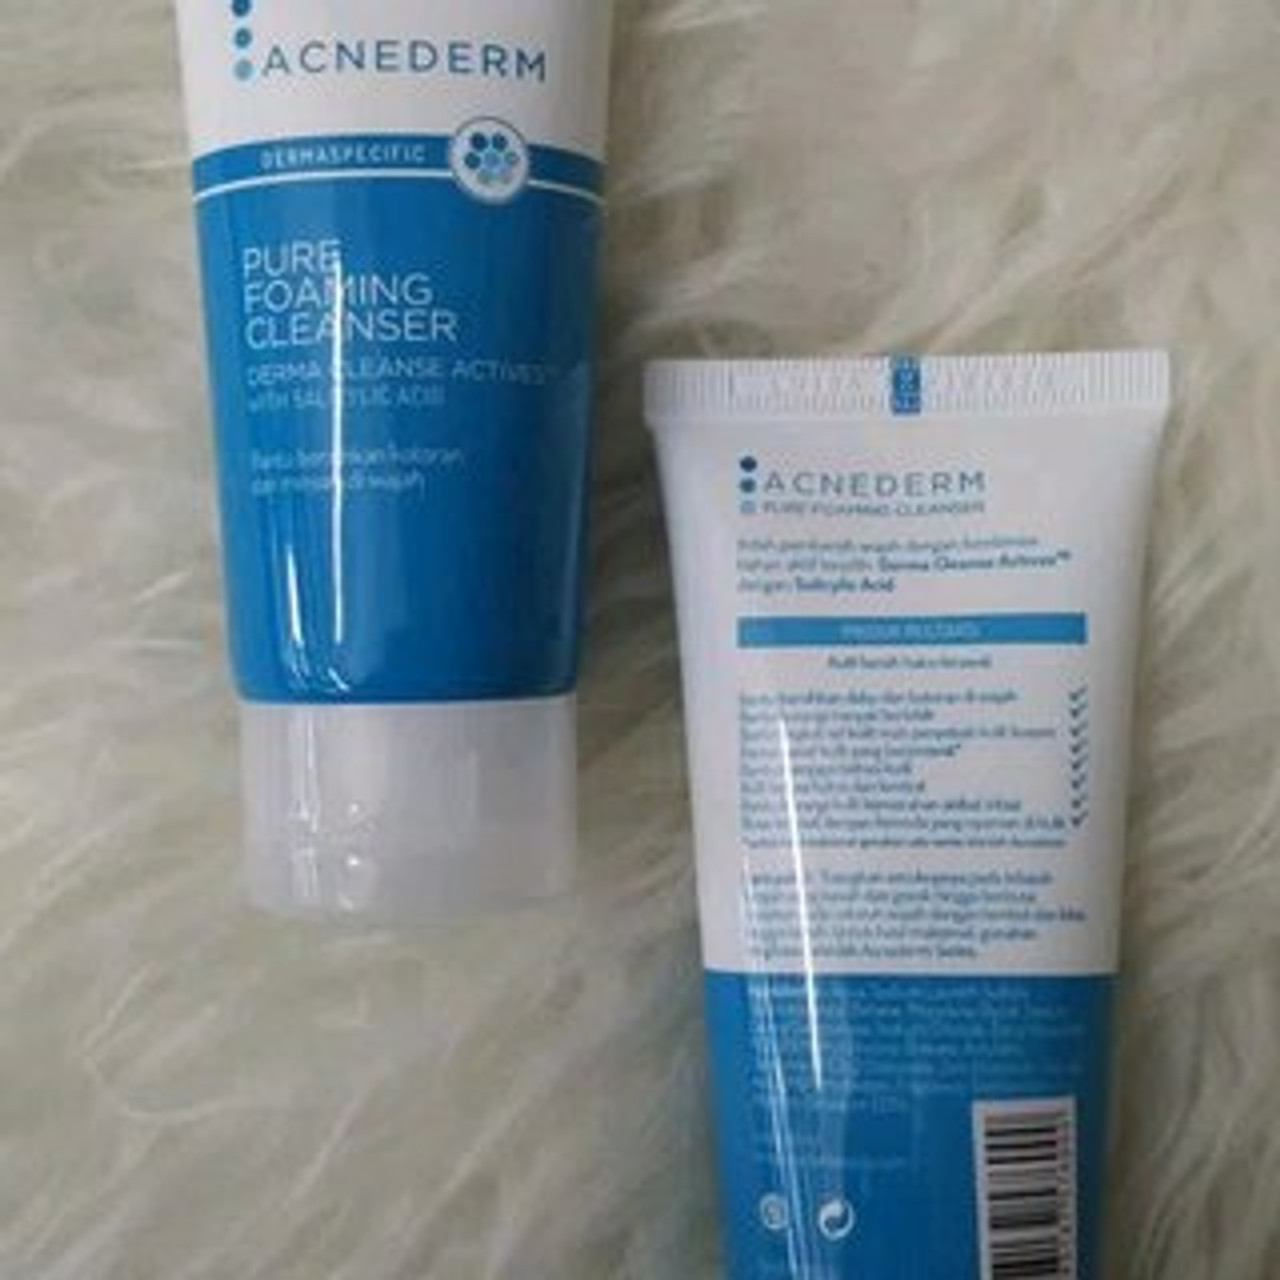 Wardah Acnederm Pure Foaming Cleanser, 60 ml